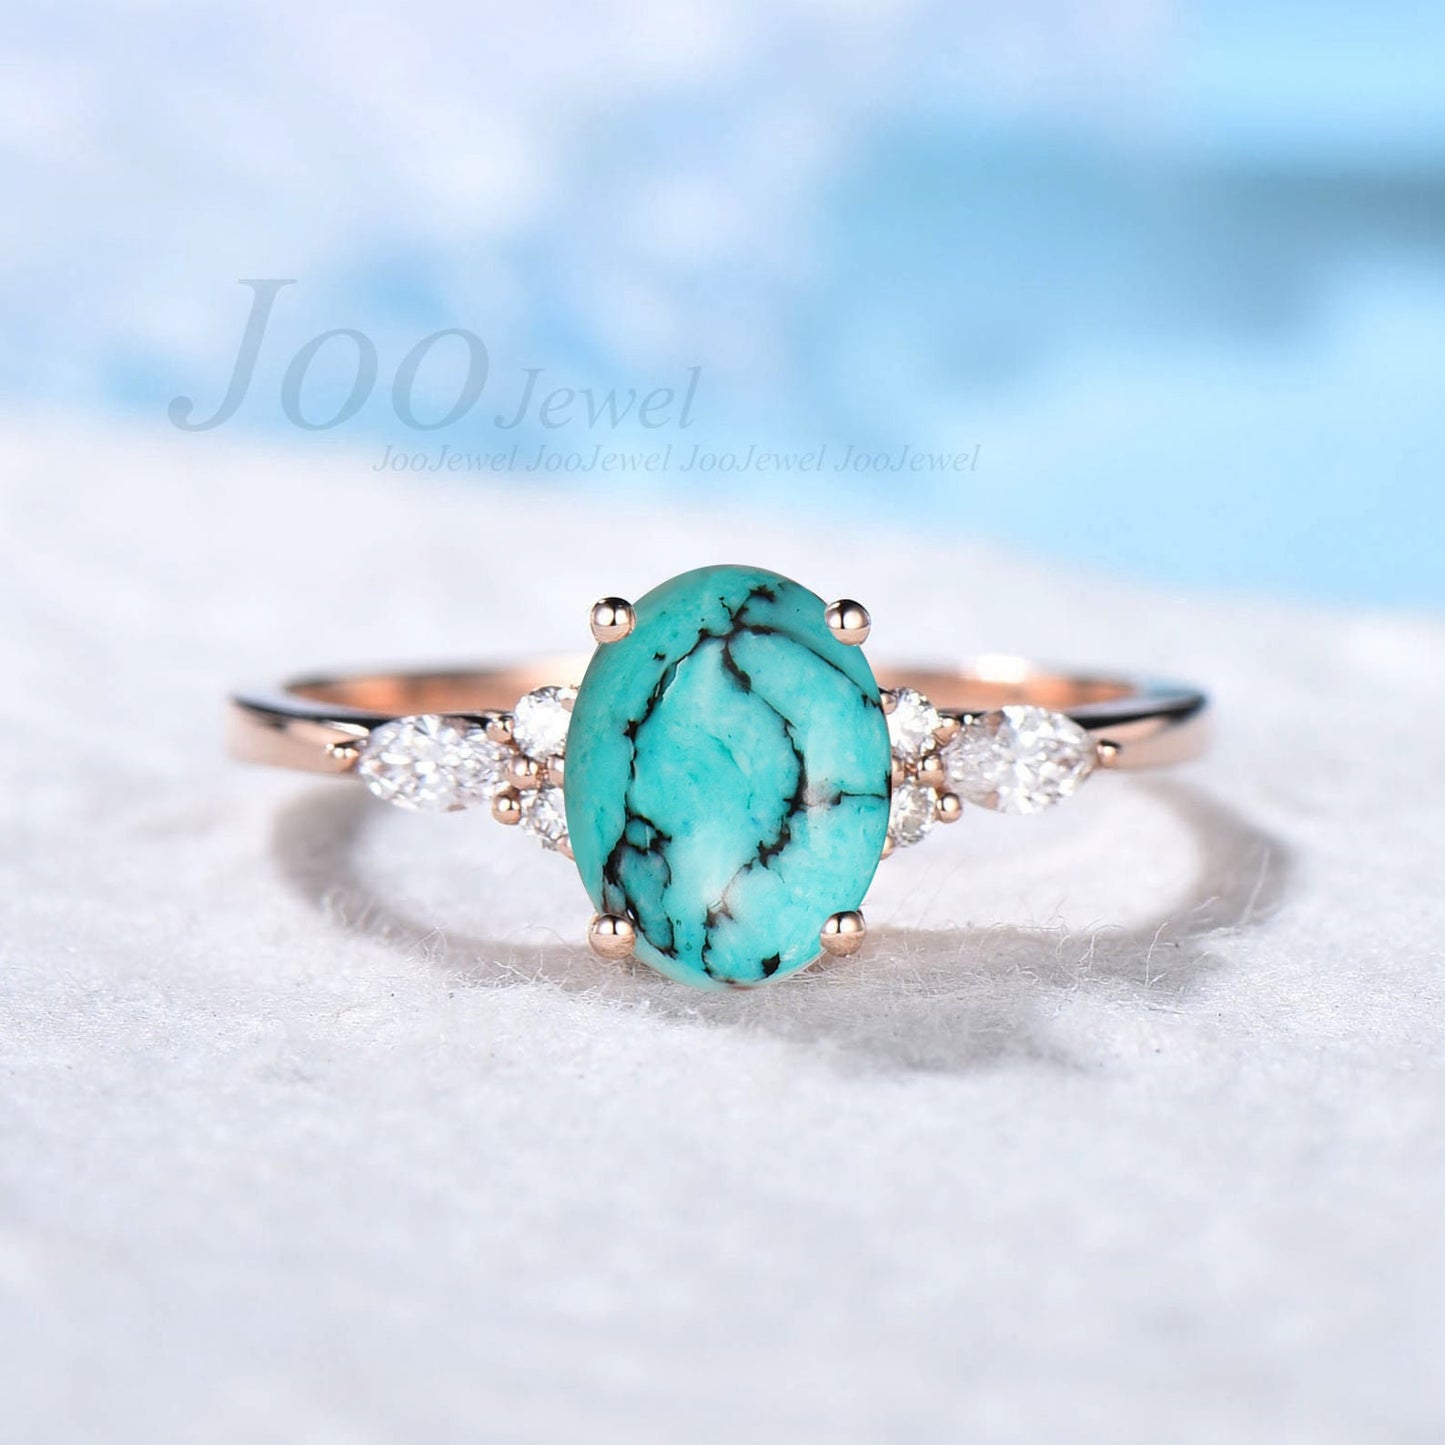 Oval Turquoise Engagement Ring Women Boho Style Sterling Silver Antique Turquoise Ring December Birthstone Ring Turquoise Gemstone Jewelry